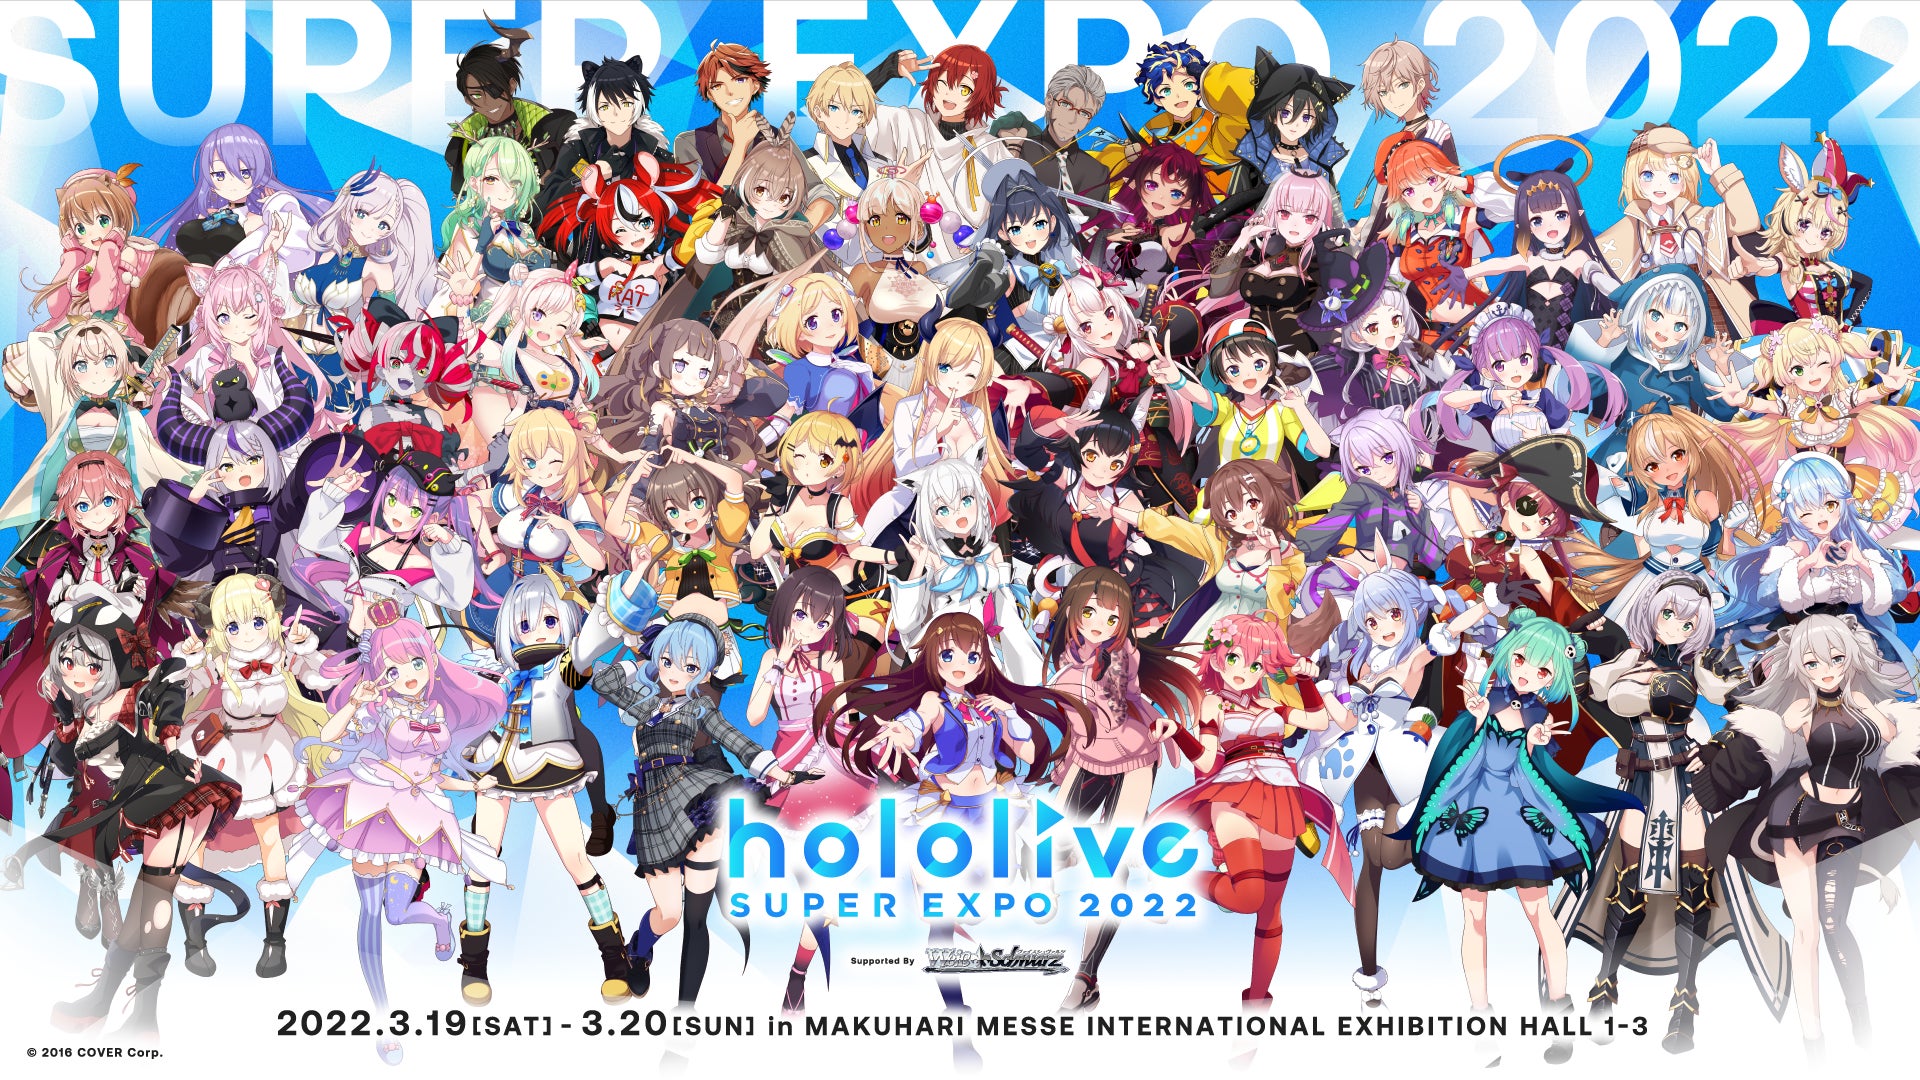 《hololive SUPER EXPO 2022》・《hololive 3rd fes. Link Your Wish》追加情報第5弾公開！